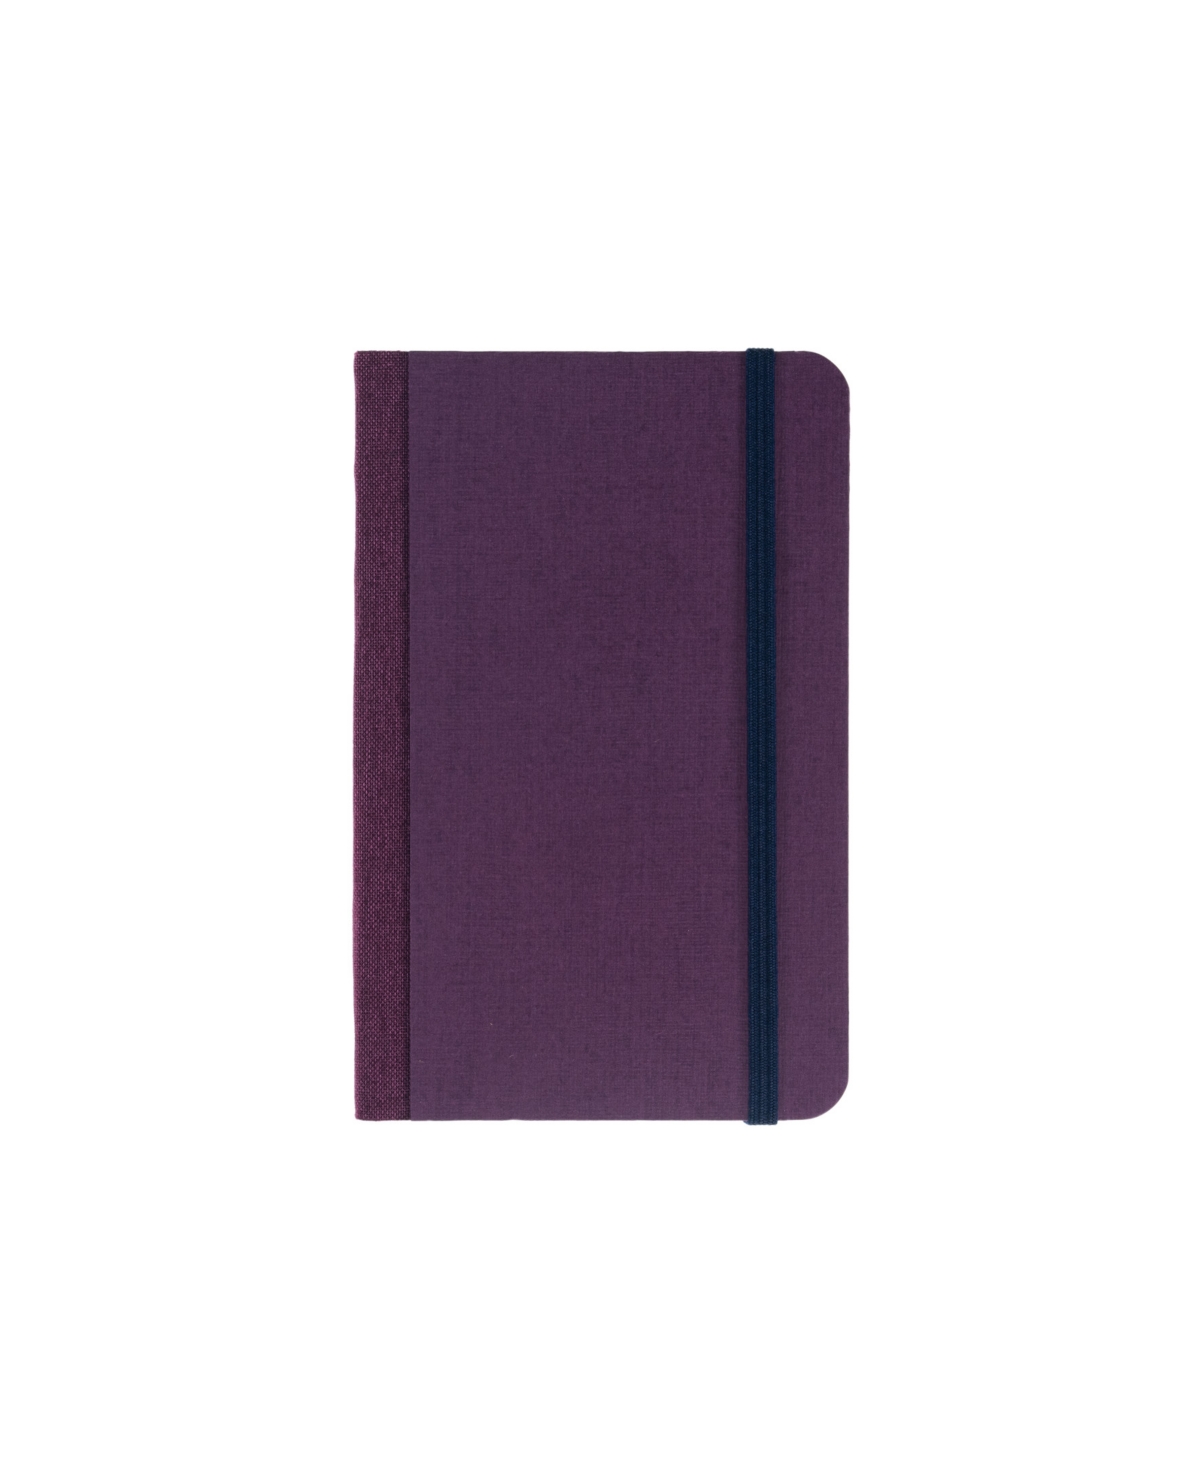 Ecoqua Plus Fabric Bound Lined Notebook, 3.5" x 5.5" - Red